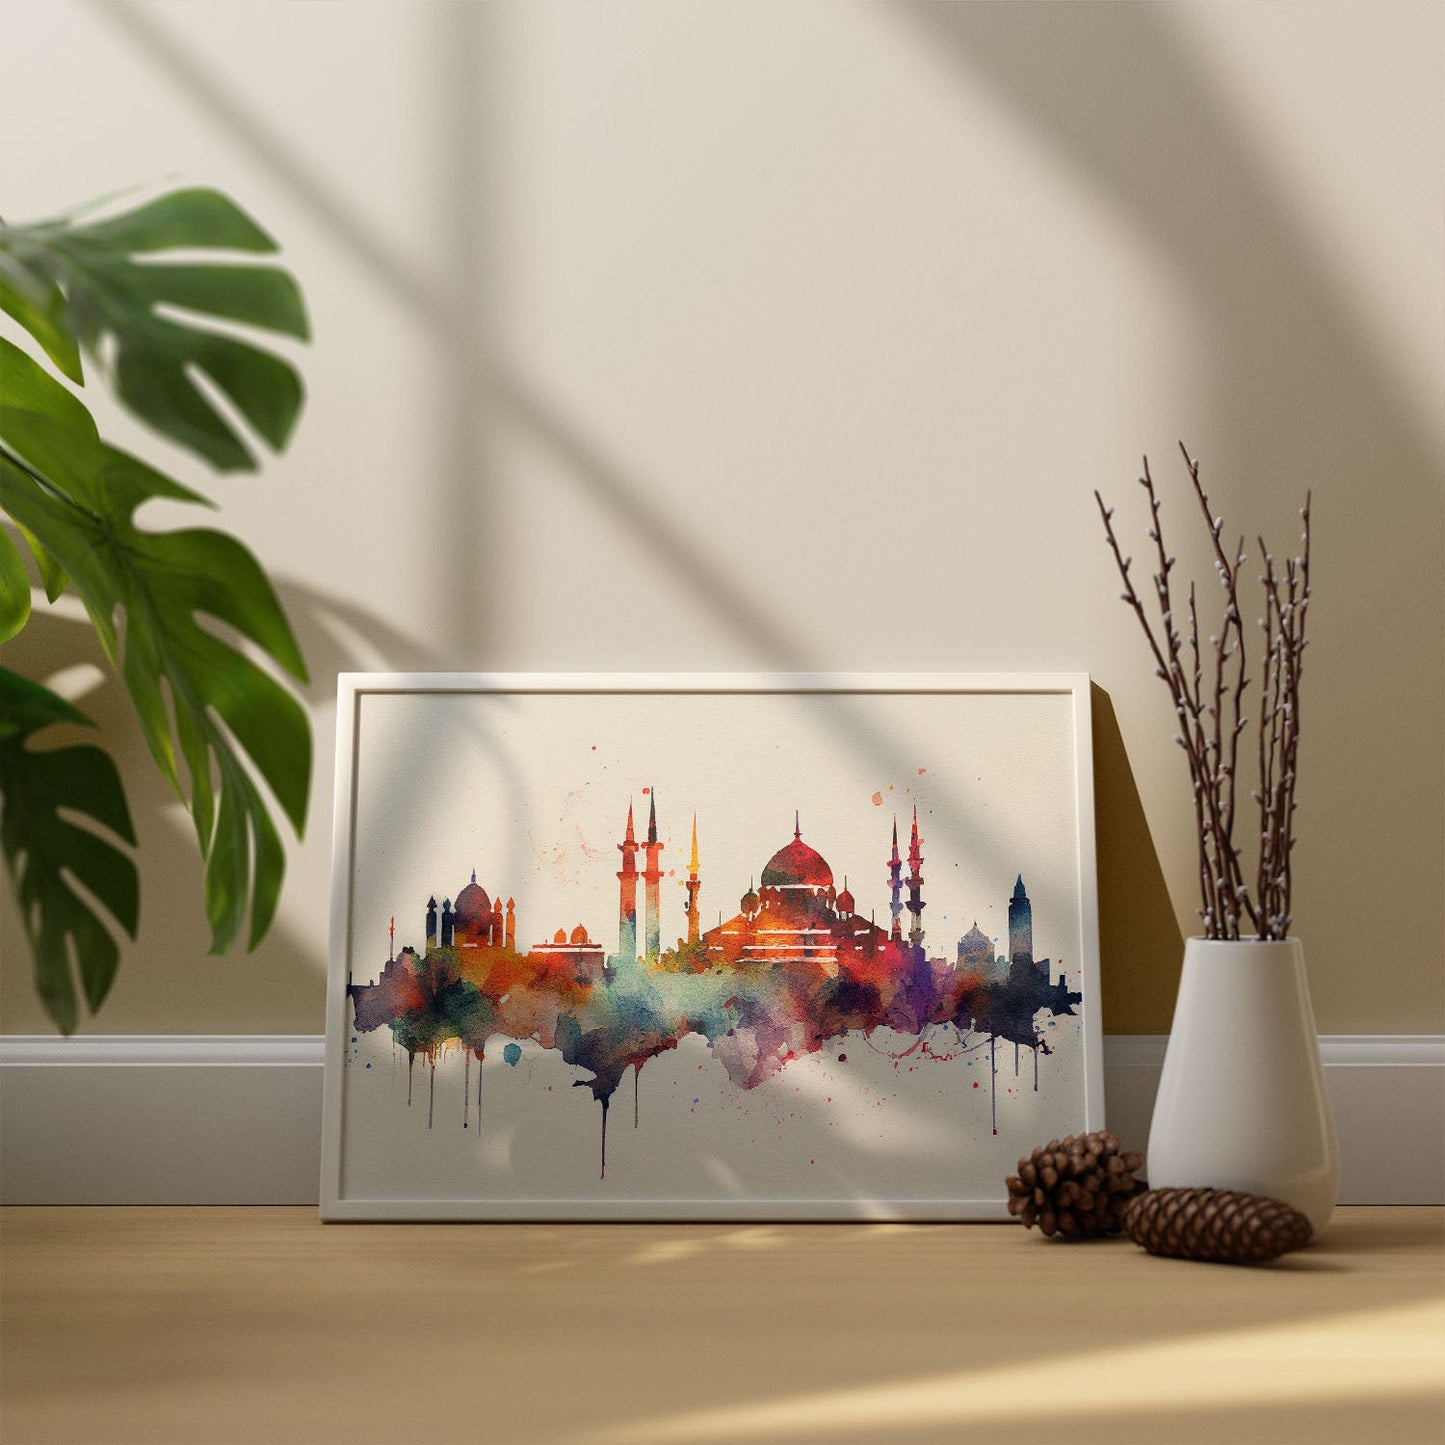 Nacnic watercolor of a skyline of the city of Istanbul_4. Aesthetic Wall Art Prints for Bedroom or Living Room Design.-Artwork-Nacnic-A4-Sin Marco-Nacnic Estudio SL